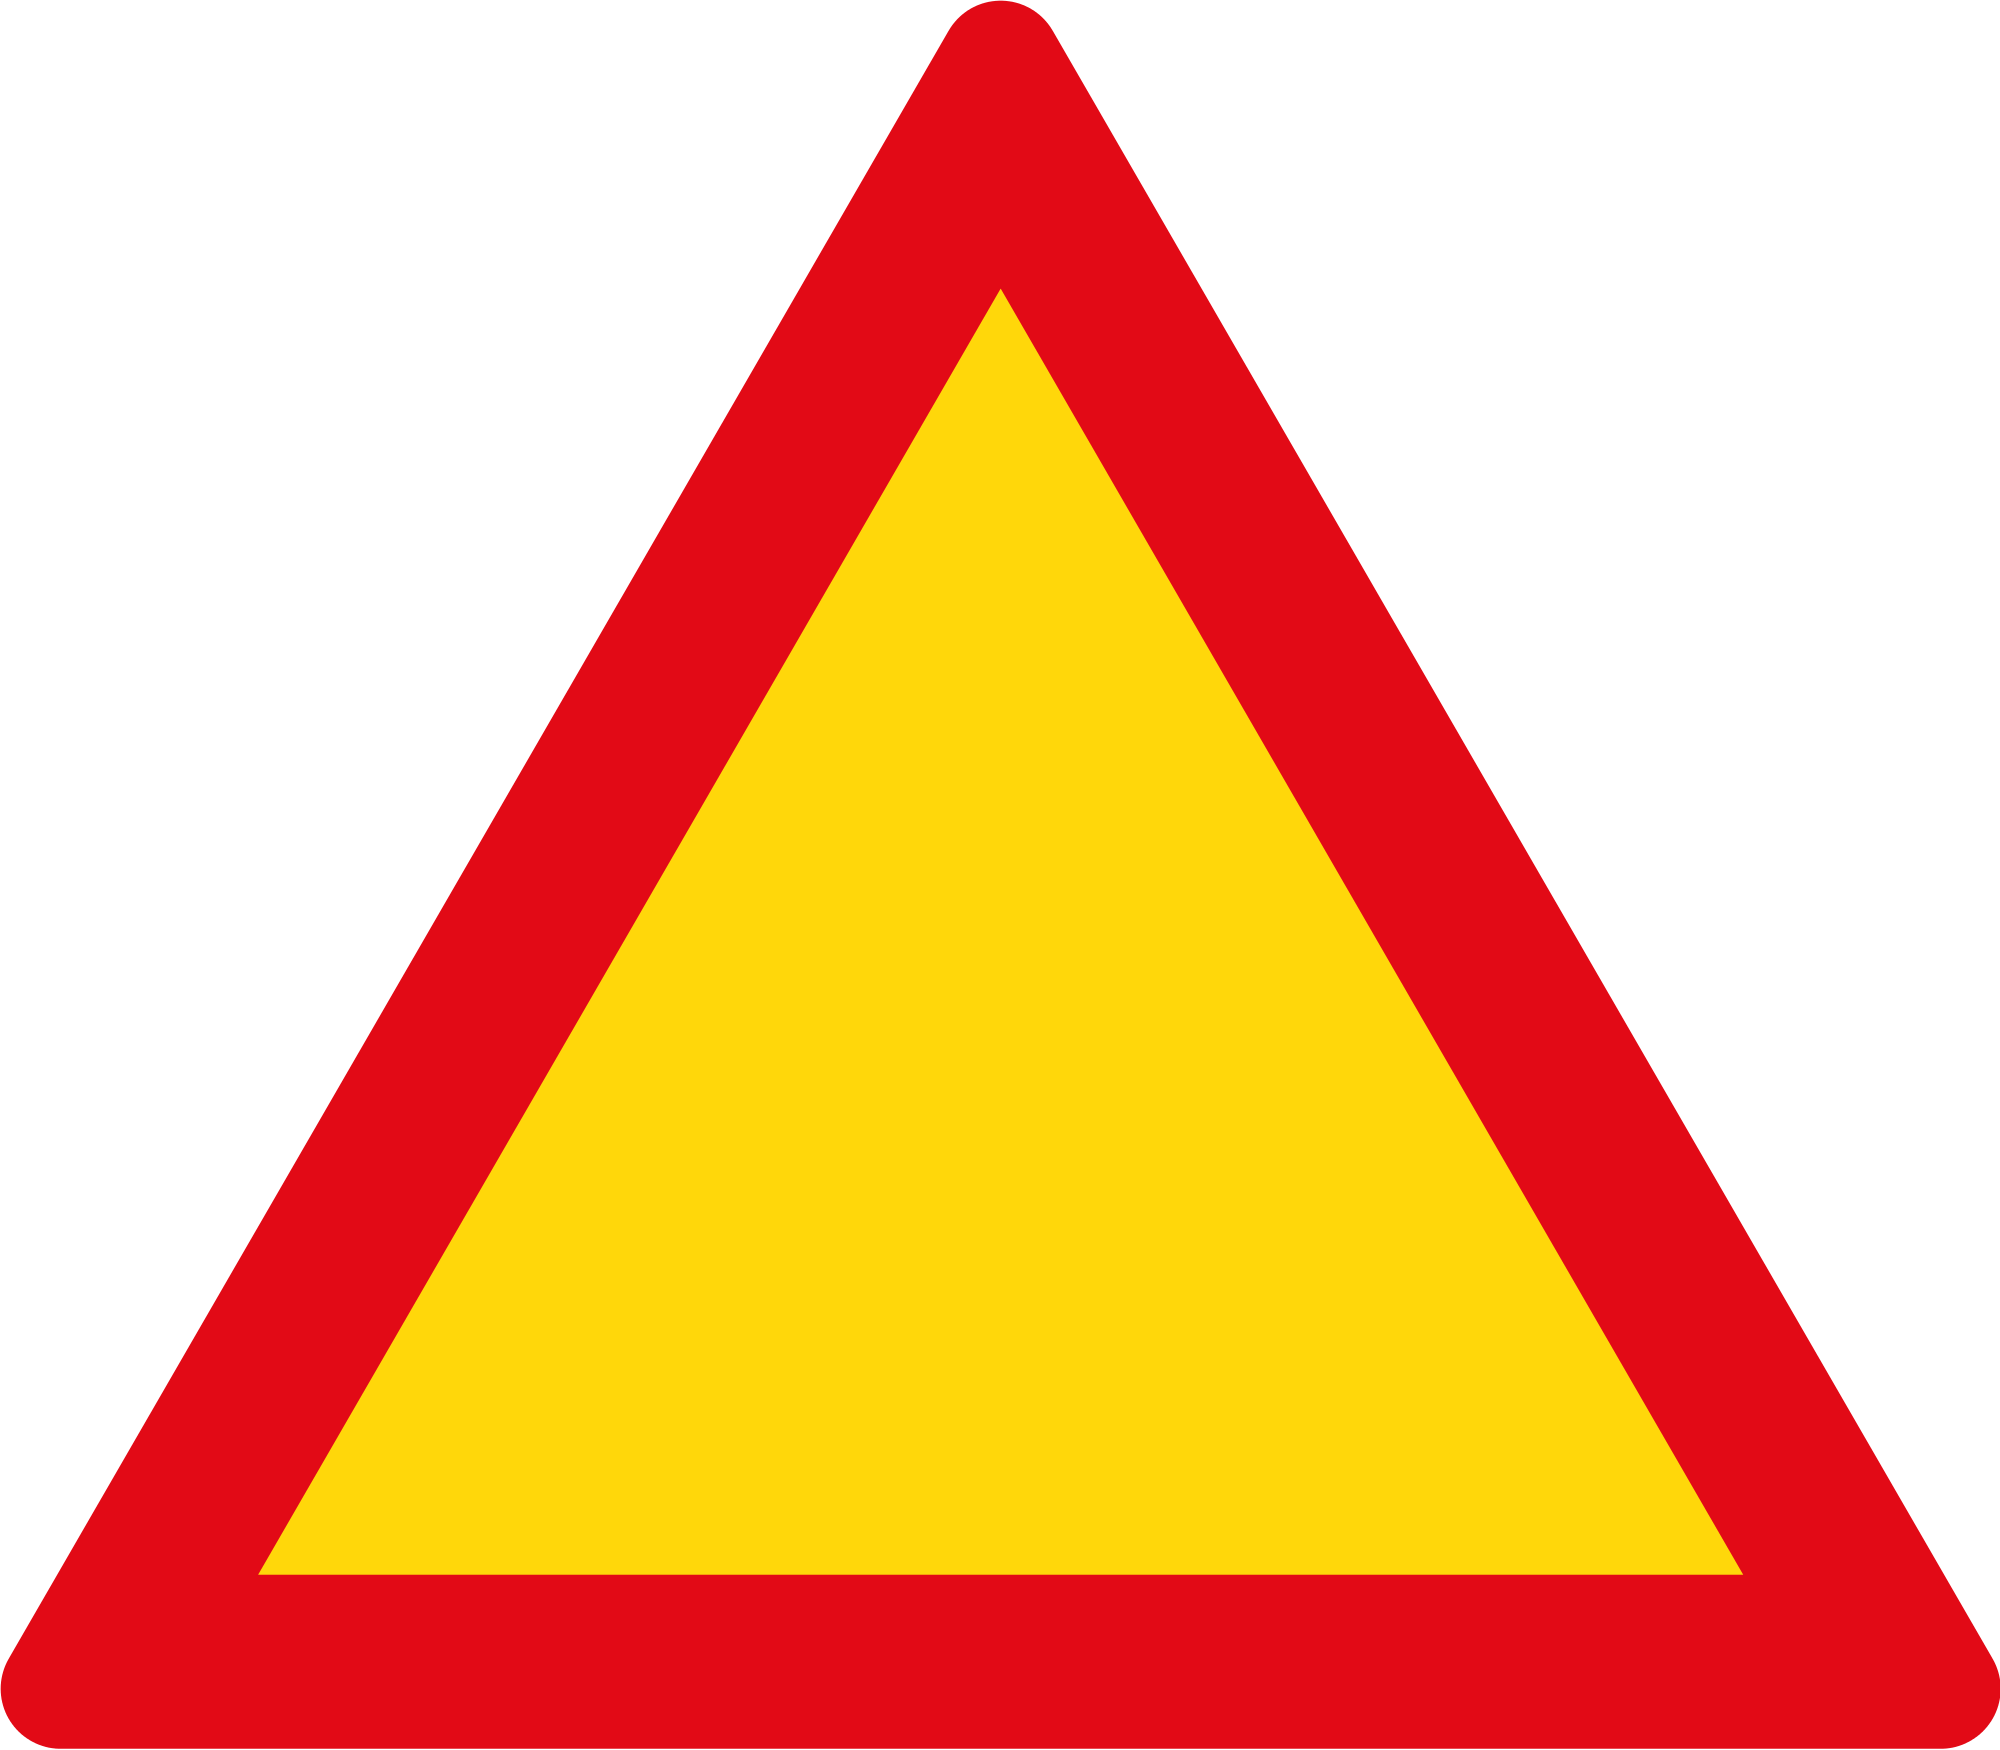 Red Orange Triangle Logo - File:Triangle warning sign (red and yellow).svg - Wikimedia Commons